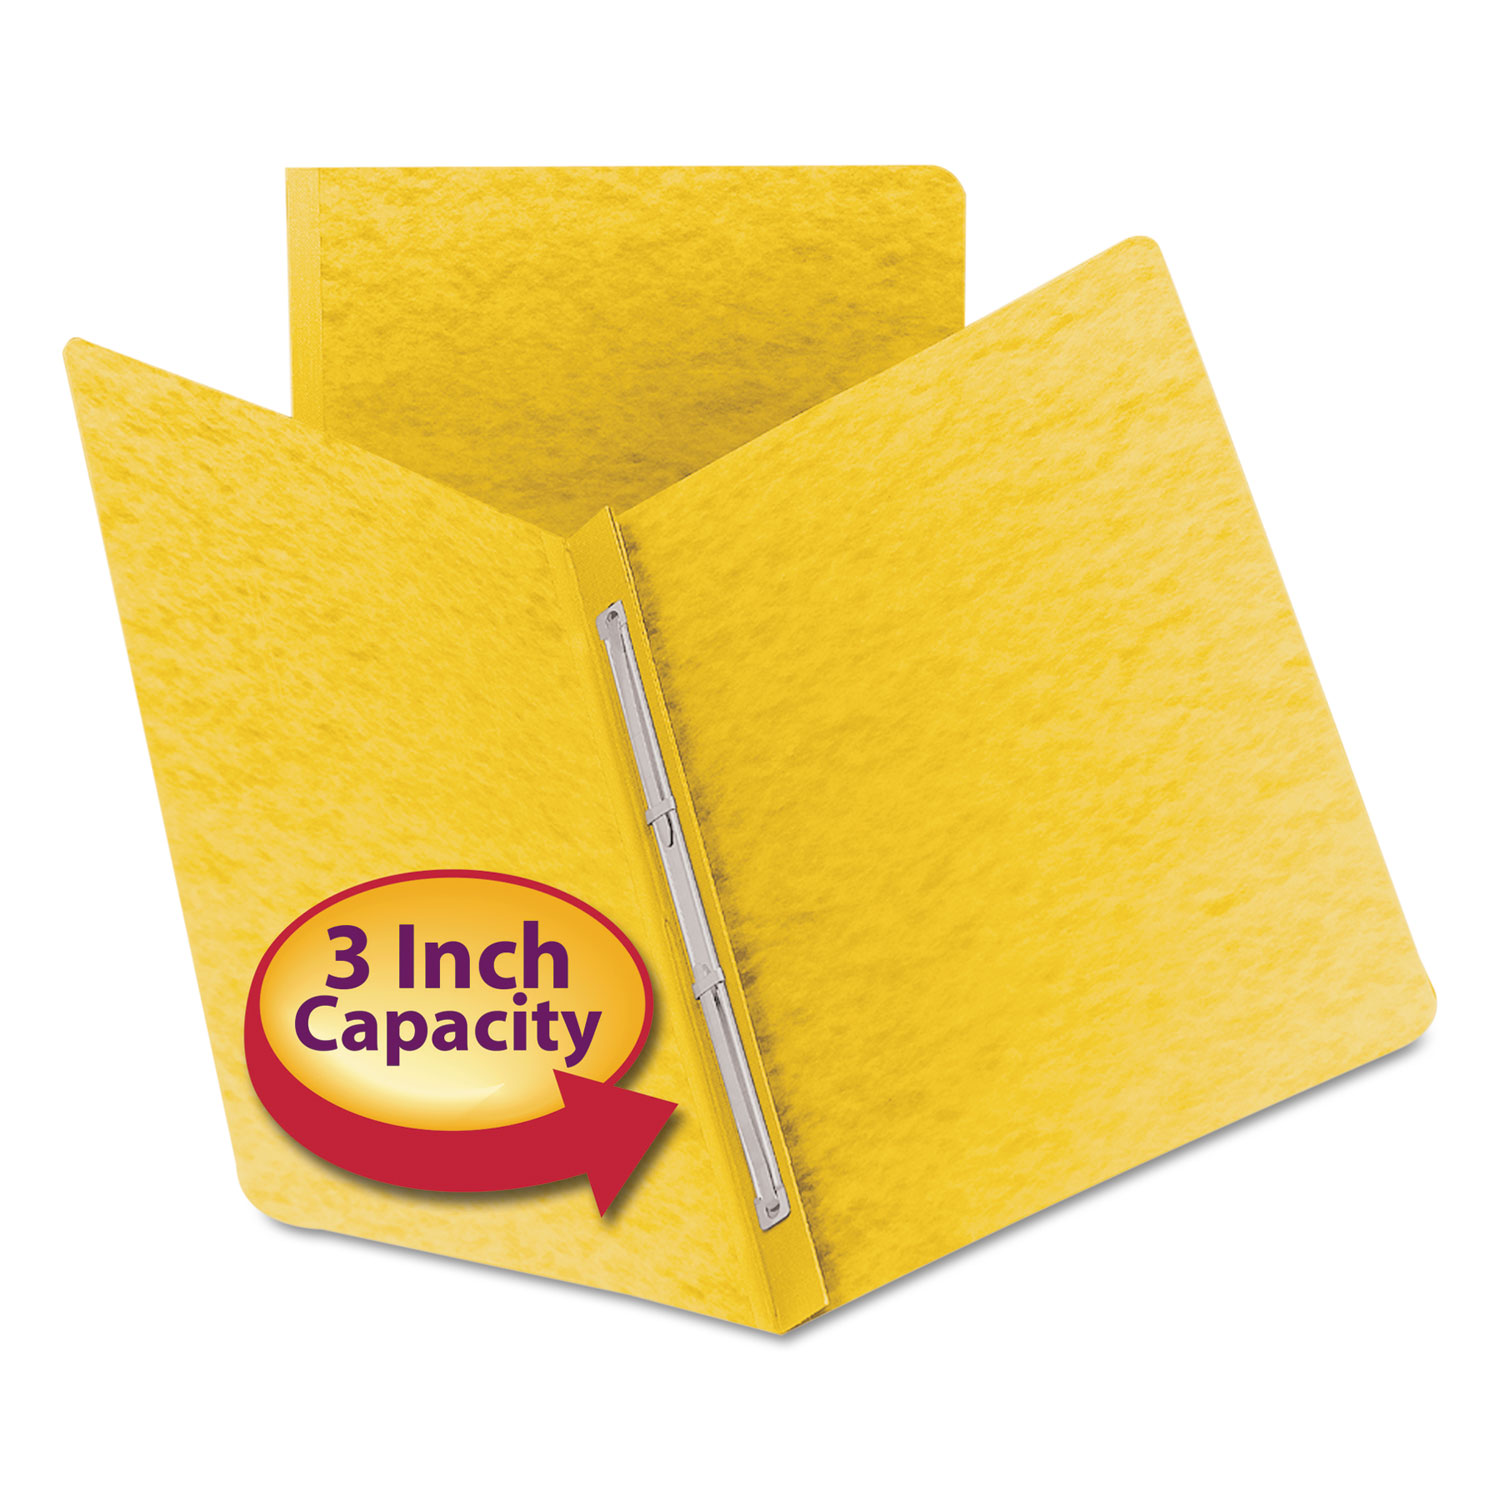 Side Opening PressGuard Report Cover, Prong Fastener, Letter, Yellow